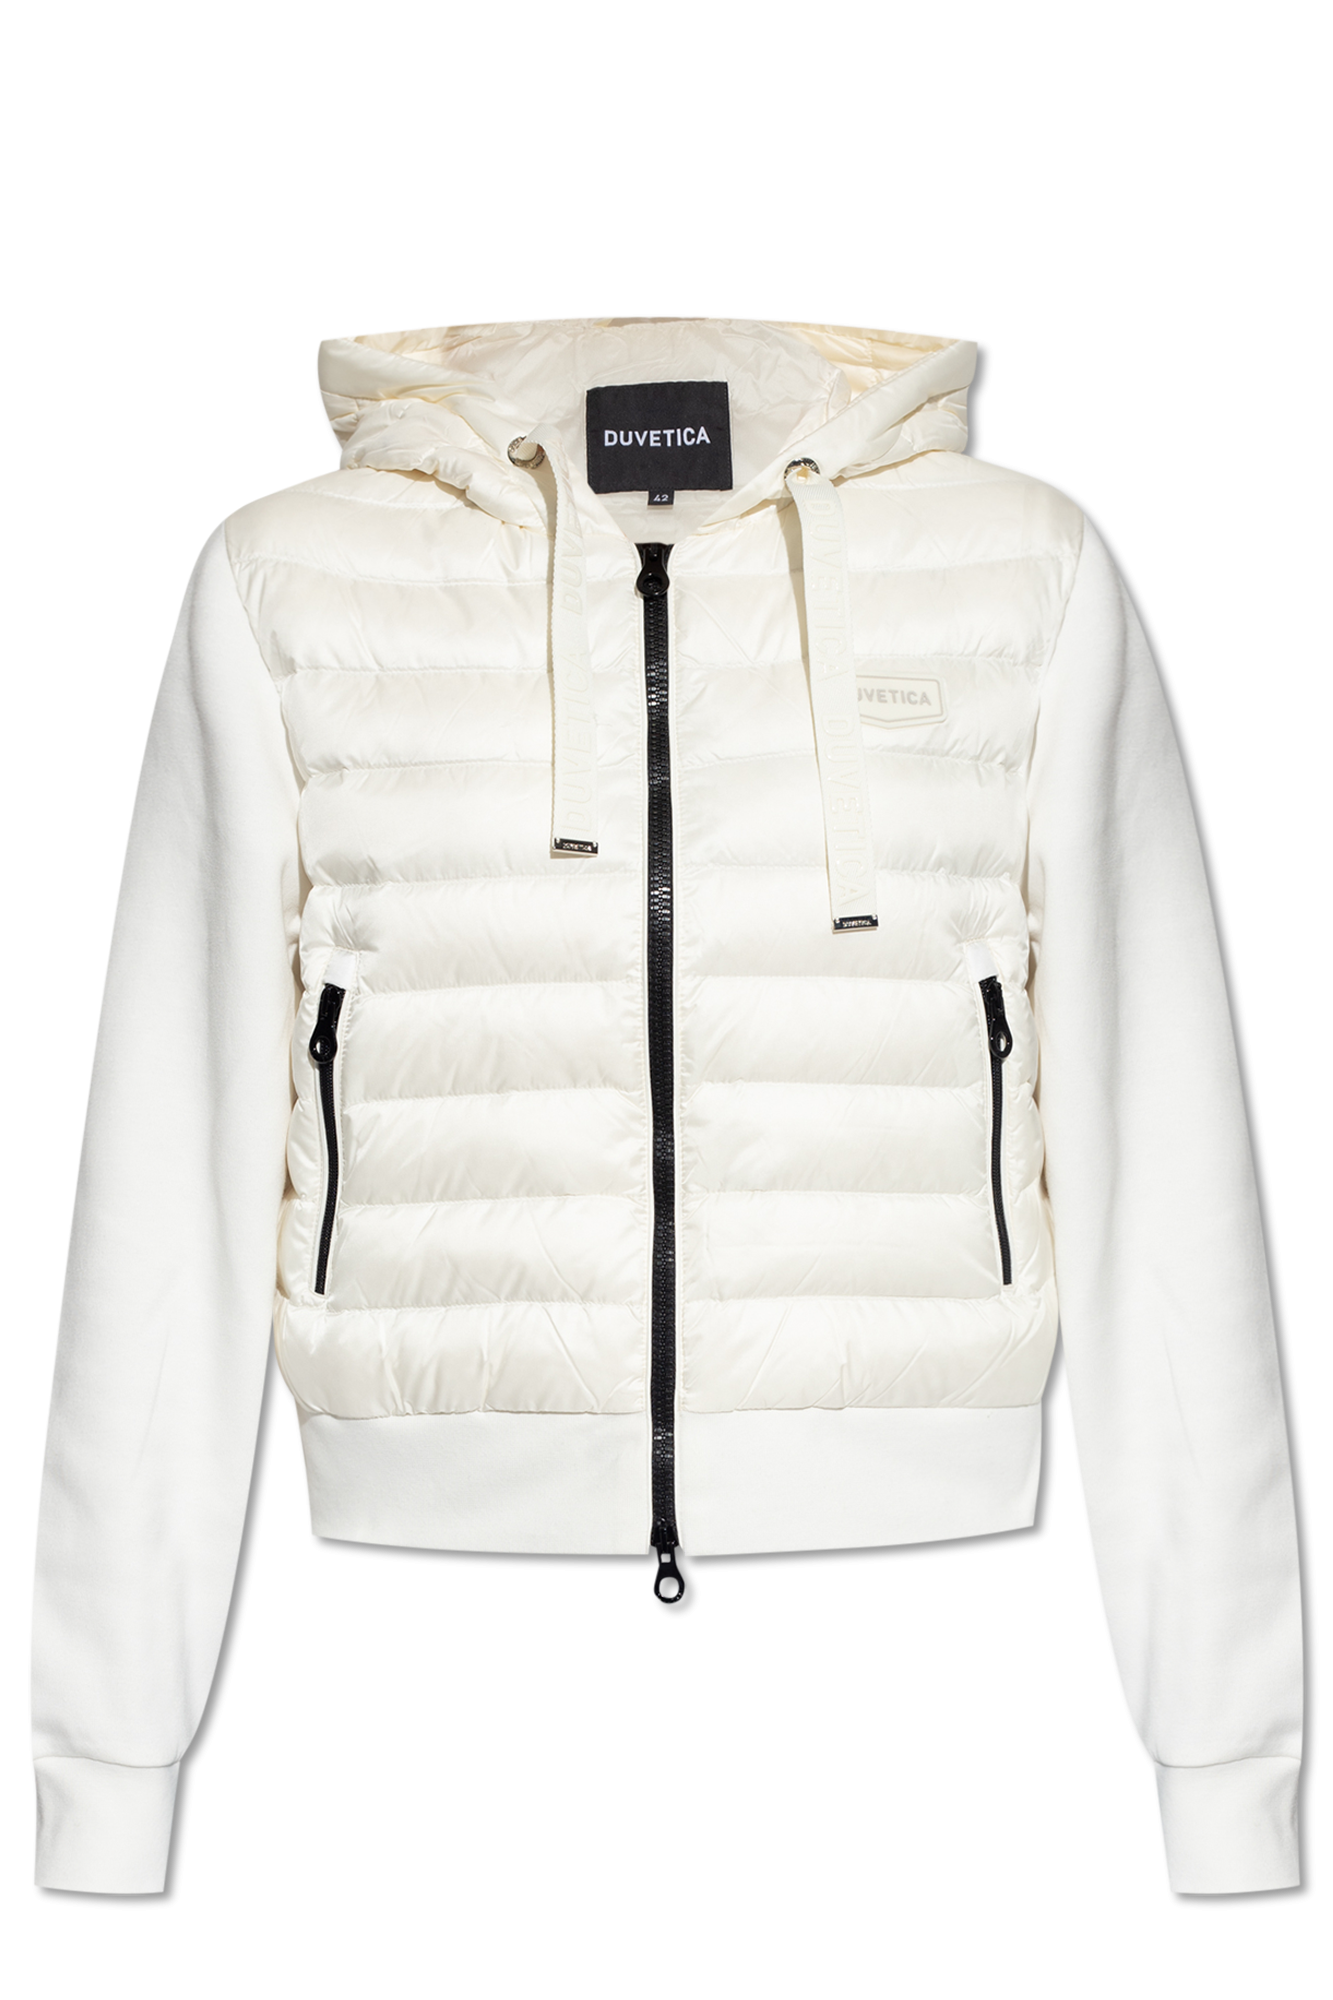 Hollister Heritage Collection Parka!  Desire clothing, Womens parka, Parka